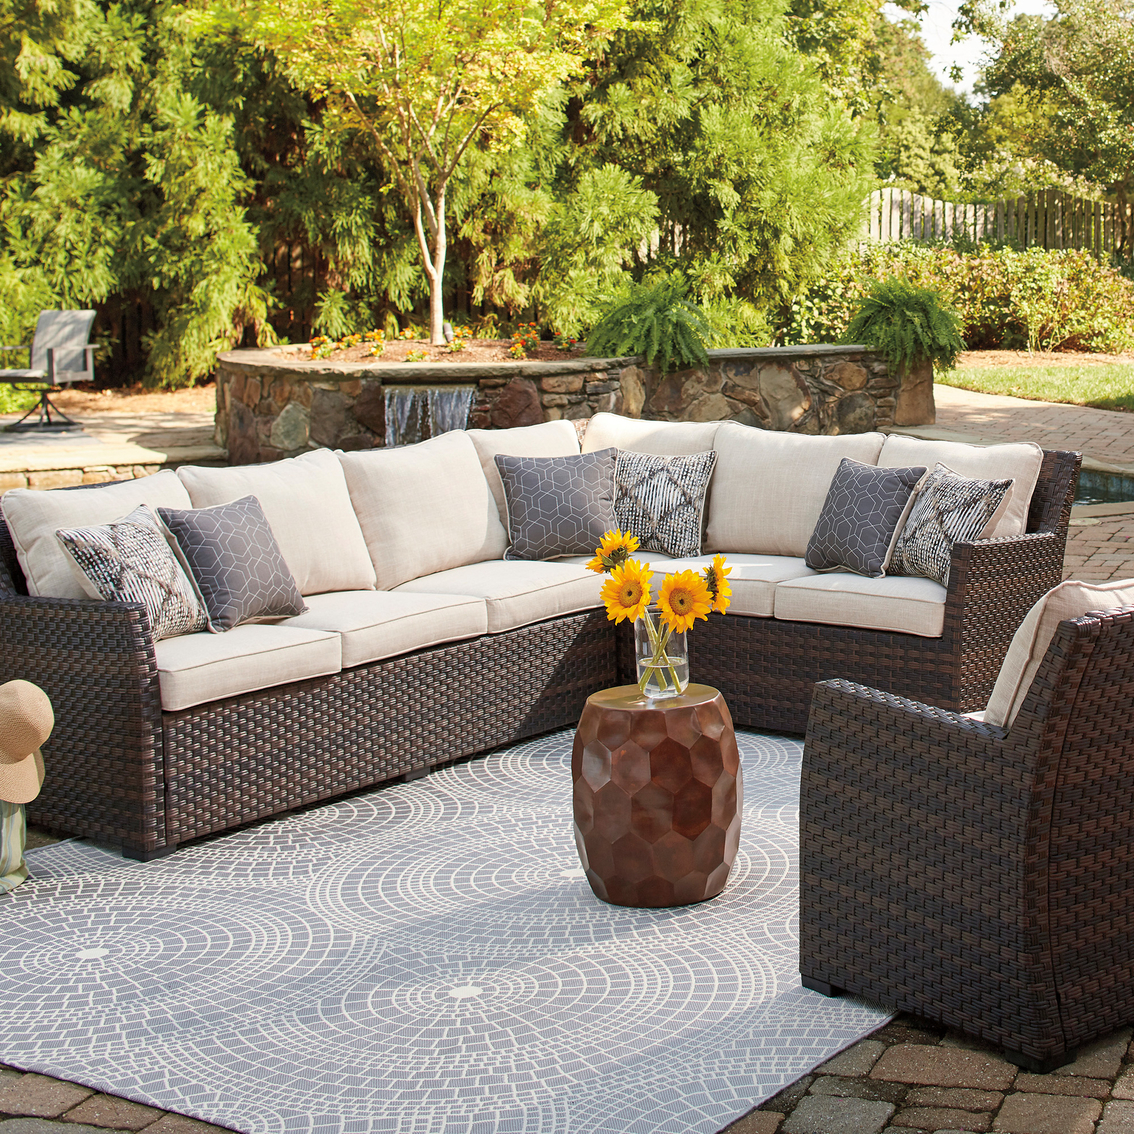 Signature Design by Ashley Easy Isle Outdoor Sofa Sectional with 1 Chair - Image 3 of 4